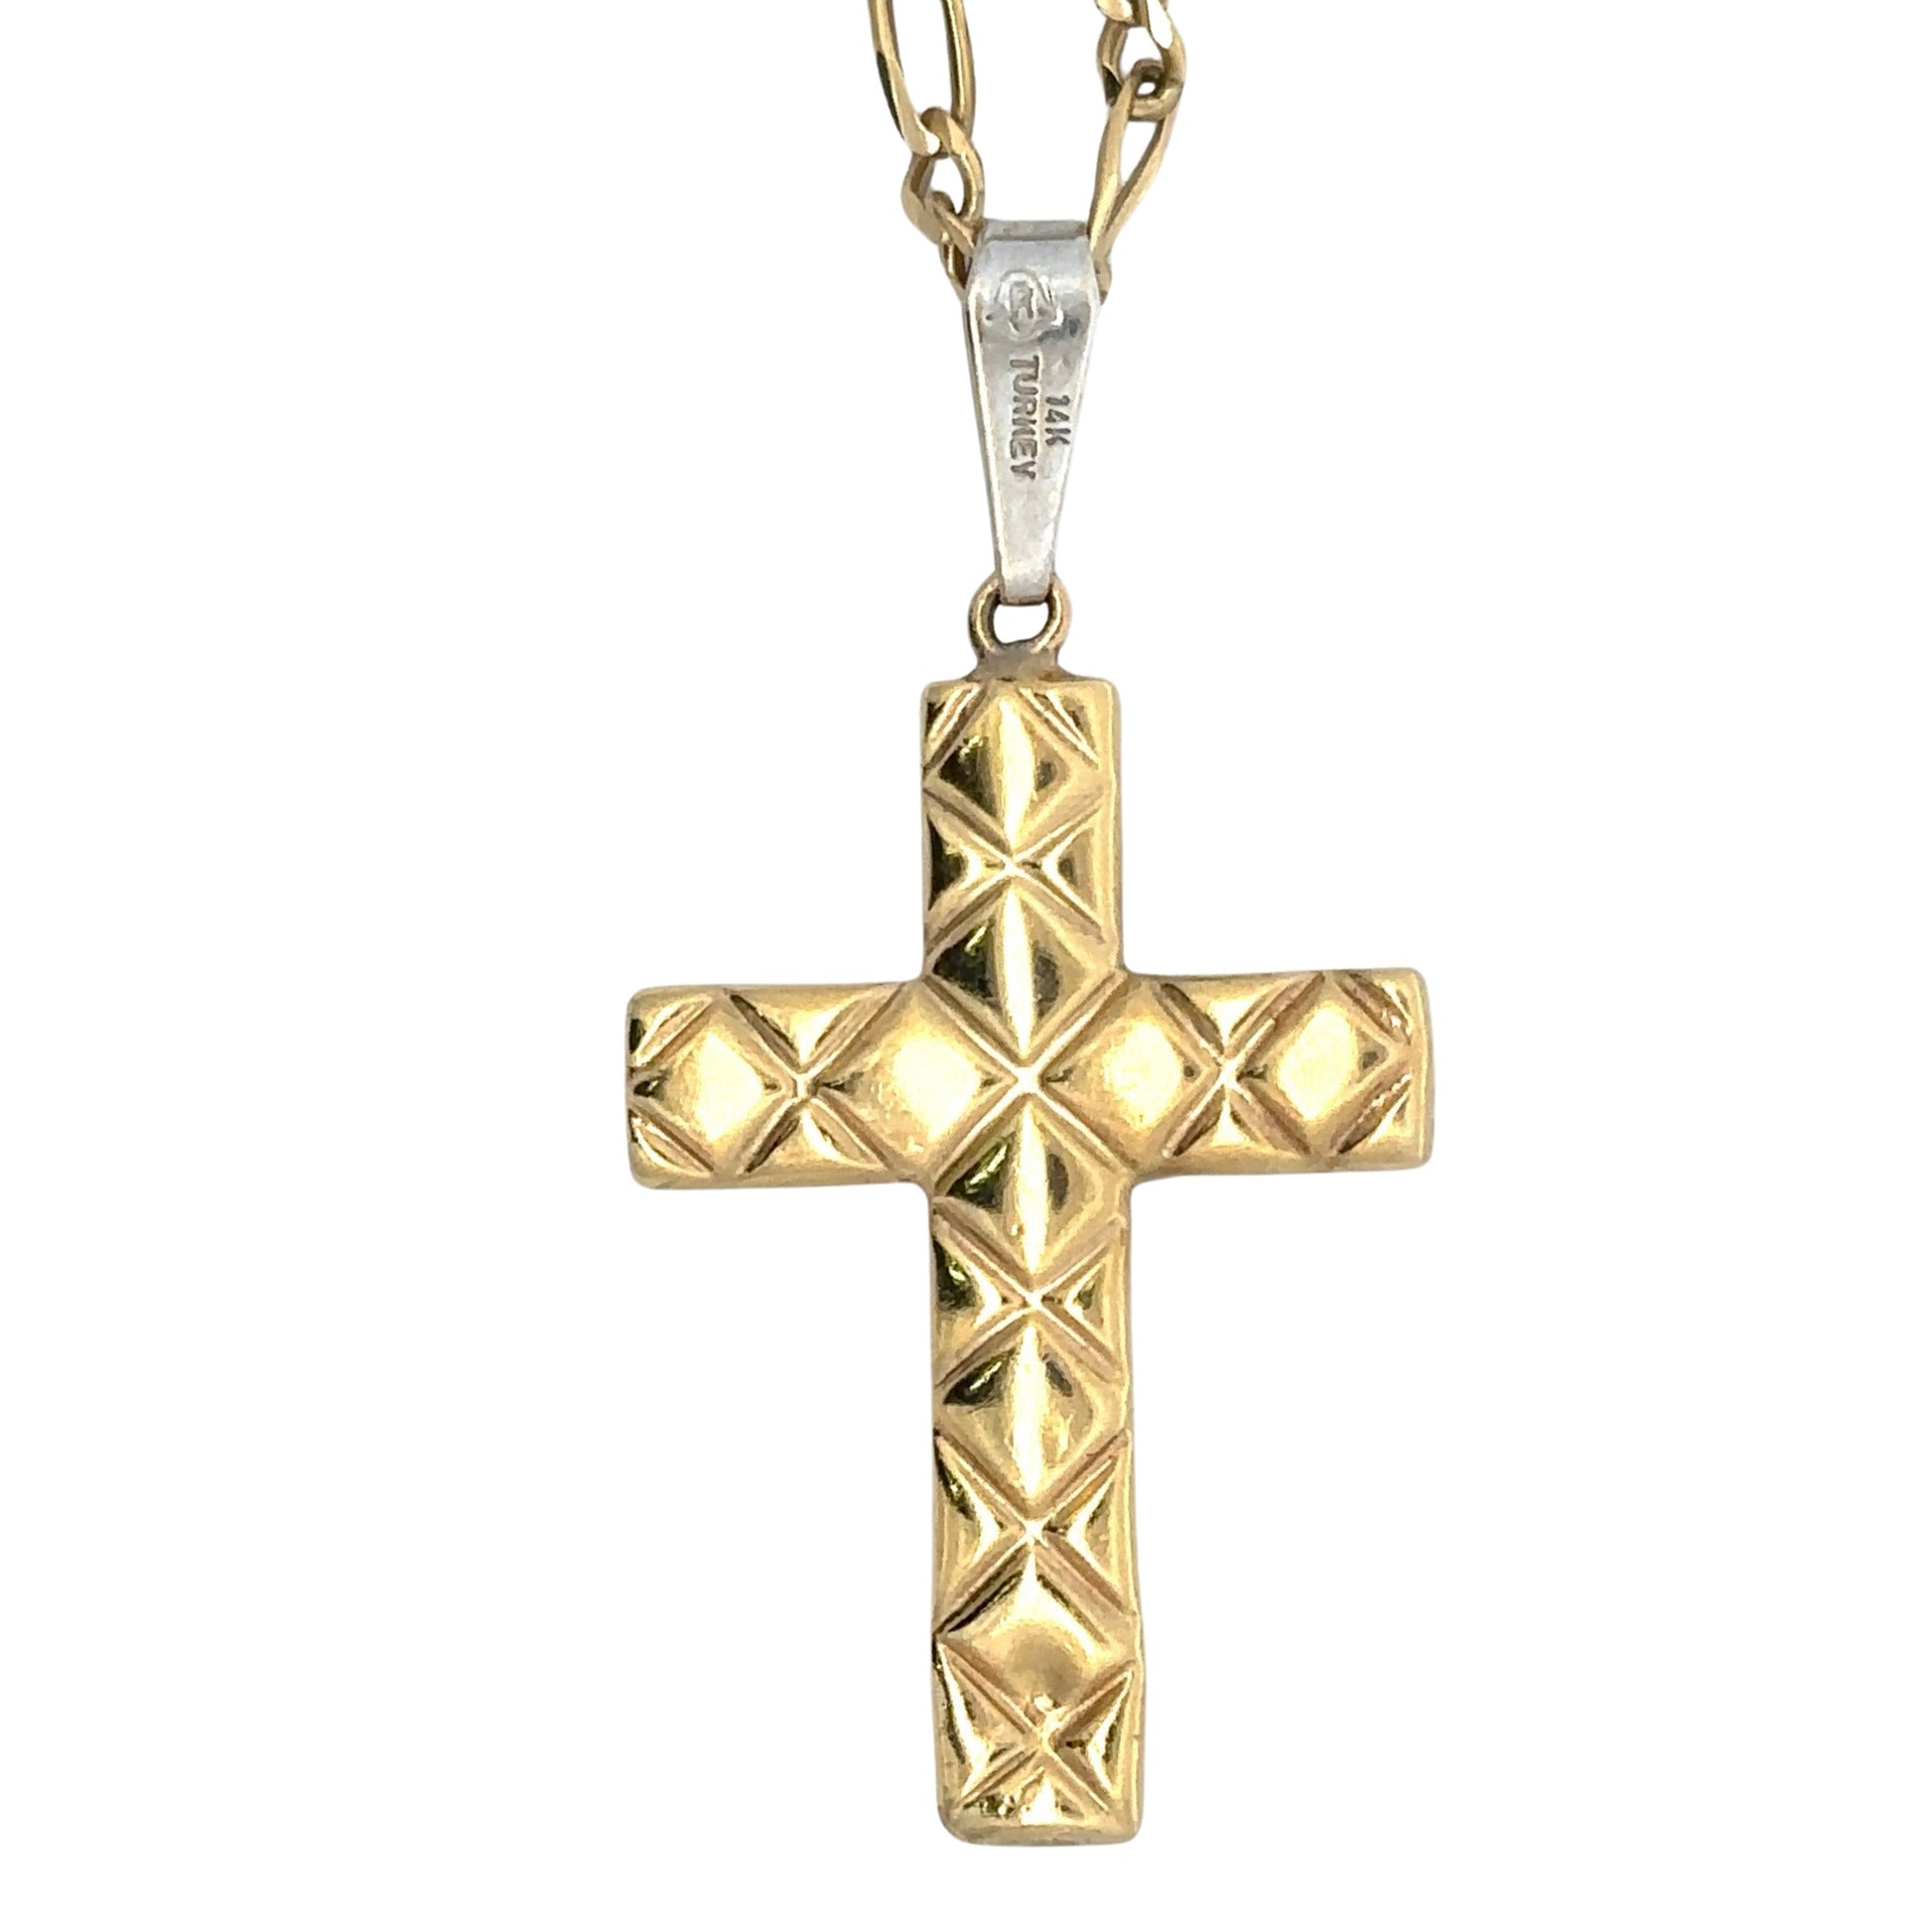 back of cross pendant with yellow gold + textured back with a 14K stamp on the white gold bail